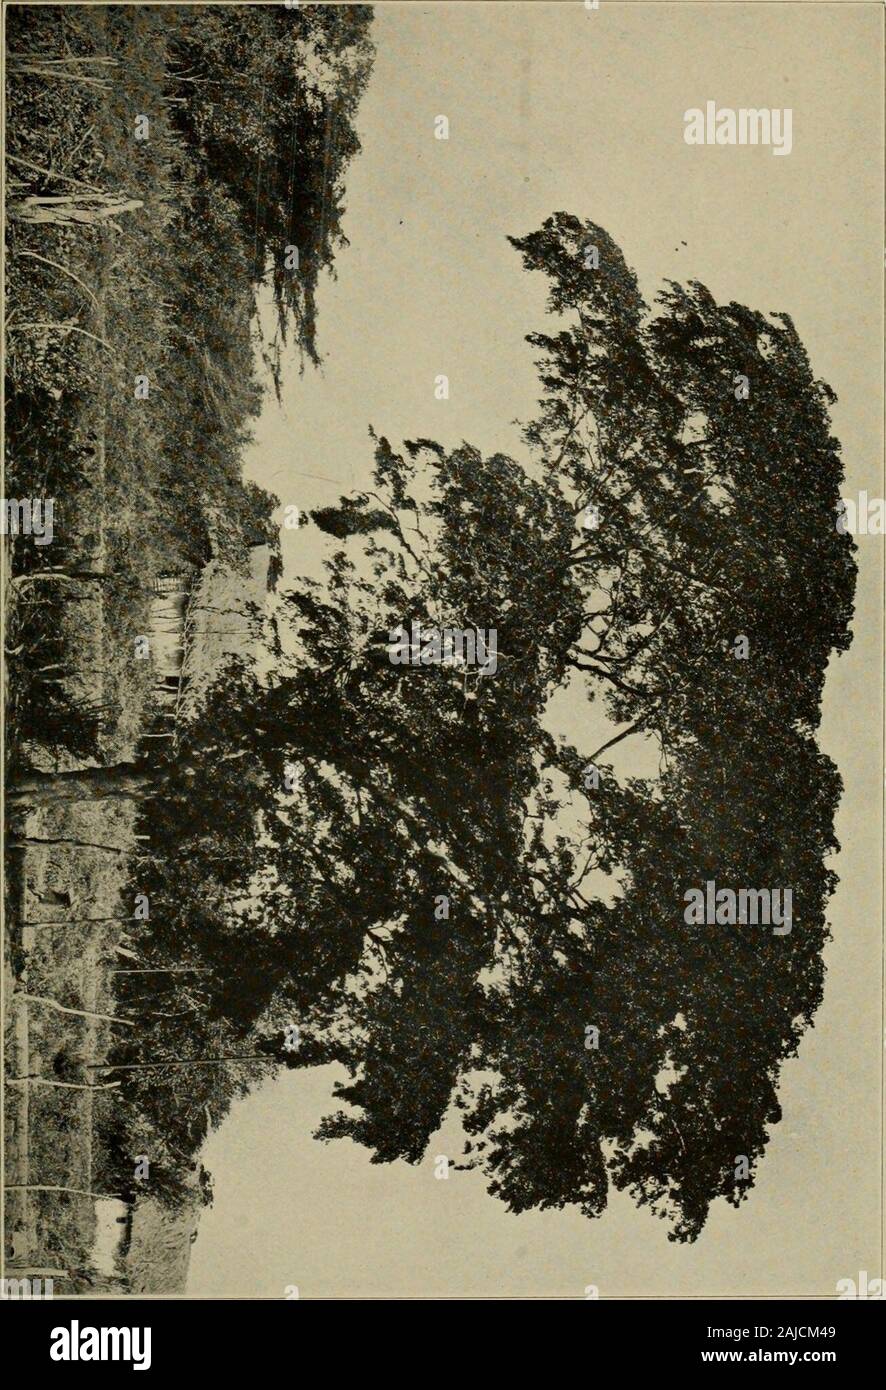 Lignum-vitae; a study of the woods of the Zygophyllaceae with reference to the true lignum-vitae of commerce--its sources, properties, uses, and substitutes . les y agricolas. Caracas, 1920, pp. 27,28. Prael, Edmund: Vergleichende Untersuchungen iiber Schutz-und Kern-Holz der Laubbaume. Pringsheims Jahrbiicher fiir wissenschaftlicheBotanik, 19: 32-35, 1888. Record, Samuel J.: Lignum-vitae: The vital wood. Scientific AmericanSup., No. 2270, July 5, 1919, pp. 4-5; 15. Record, Samuel J.: Lignum-vitae blocks for stern bearings on steamships.Woodworker (Indianapolis), Apr. 20, 1920, p. 40. Record, Stock Photo